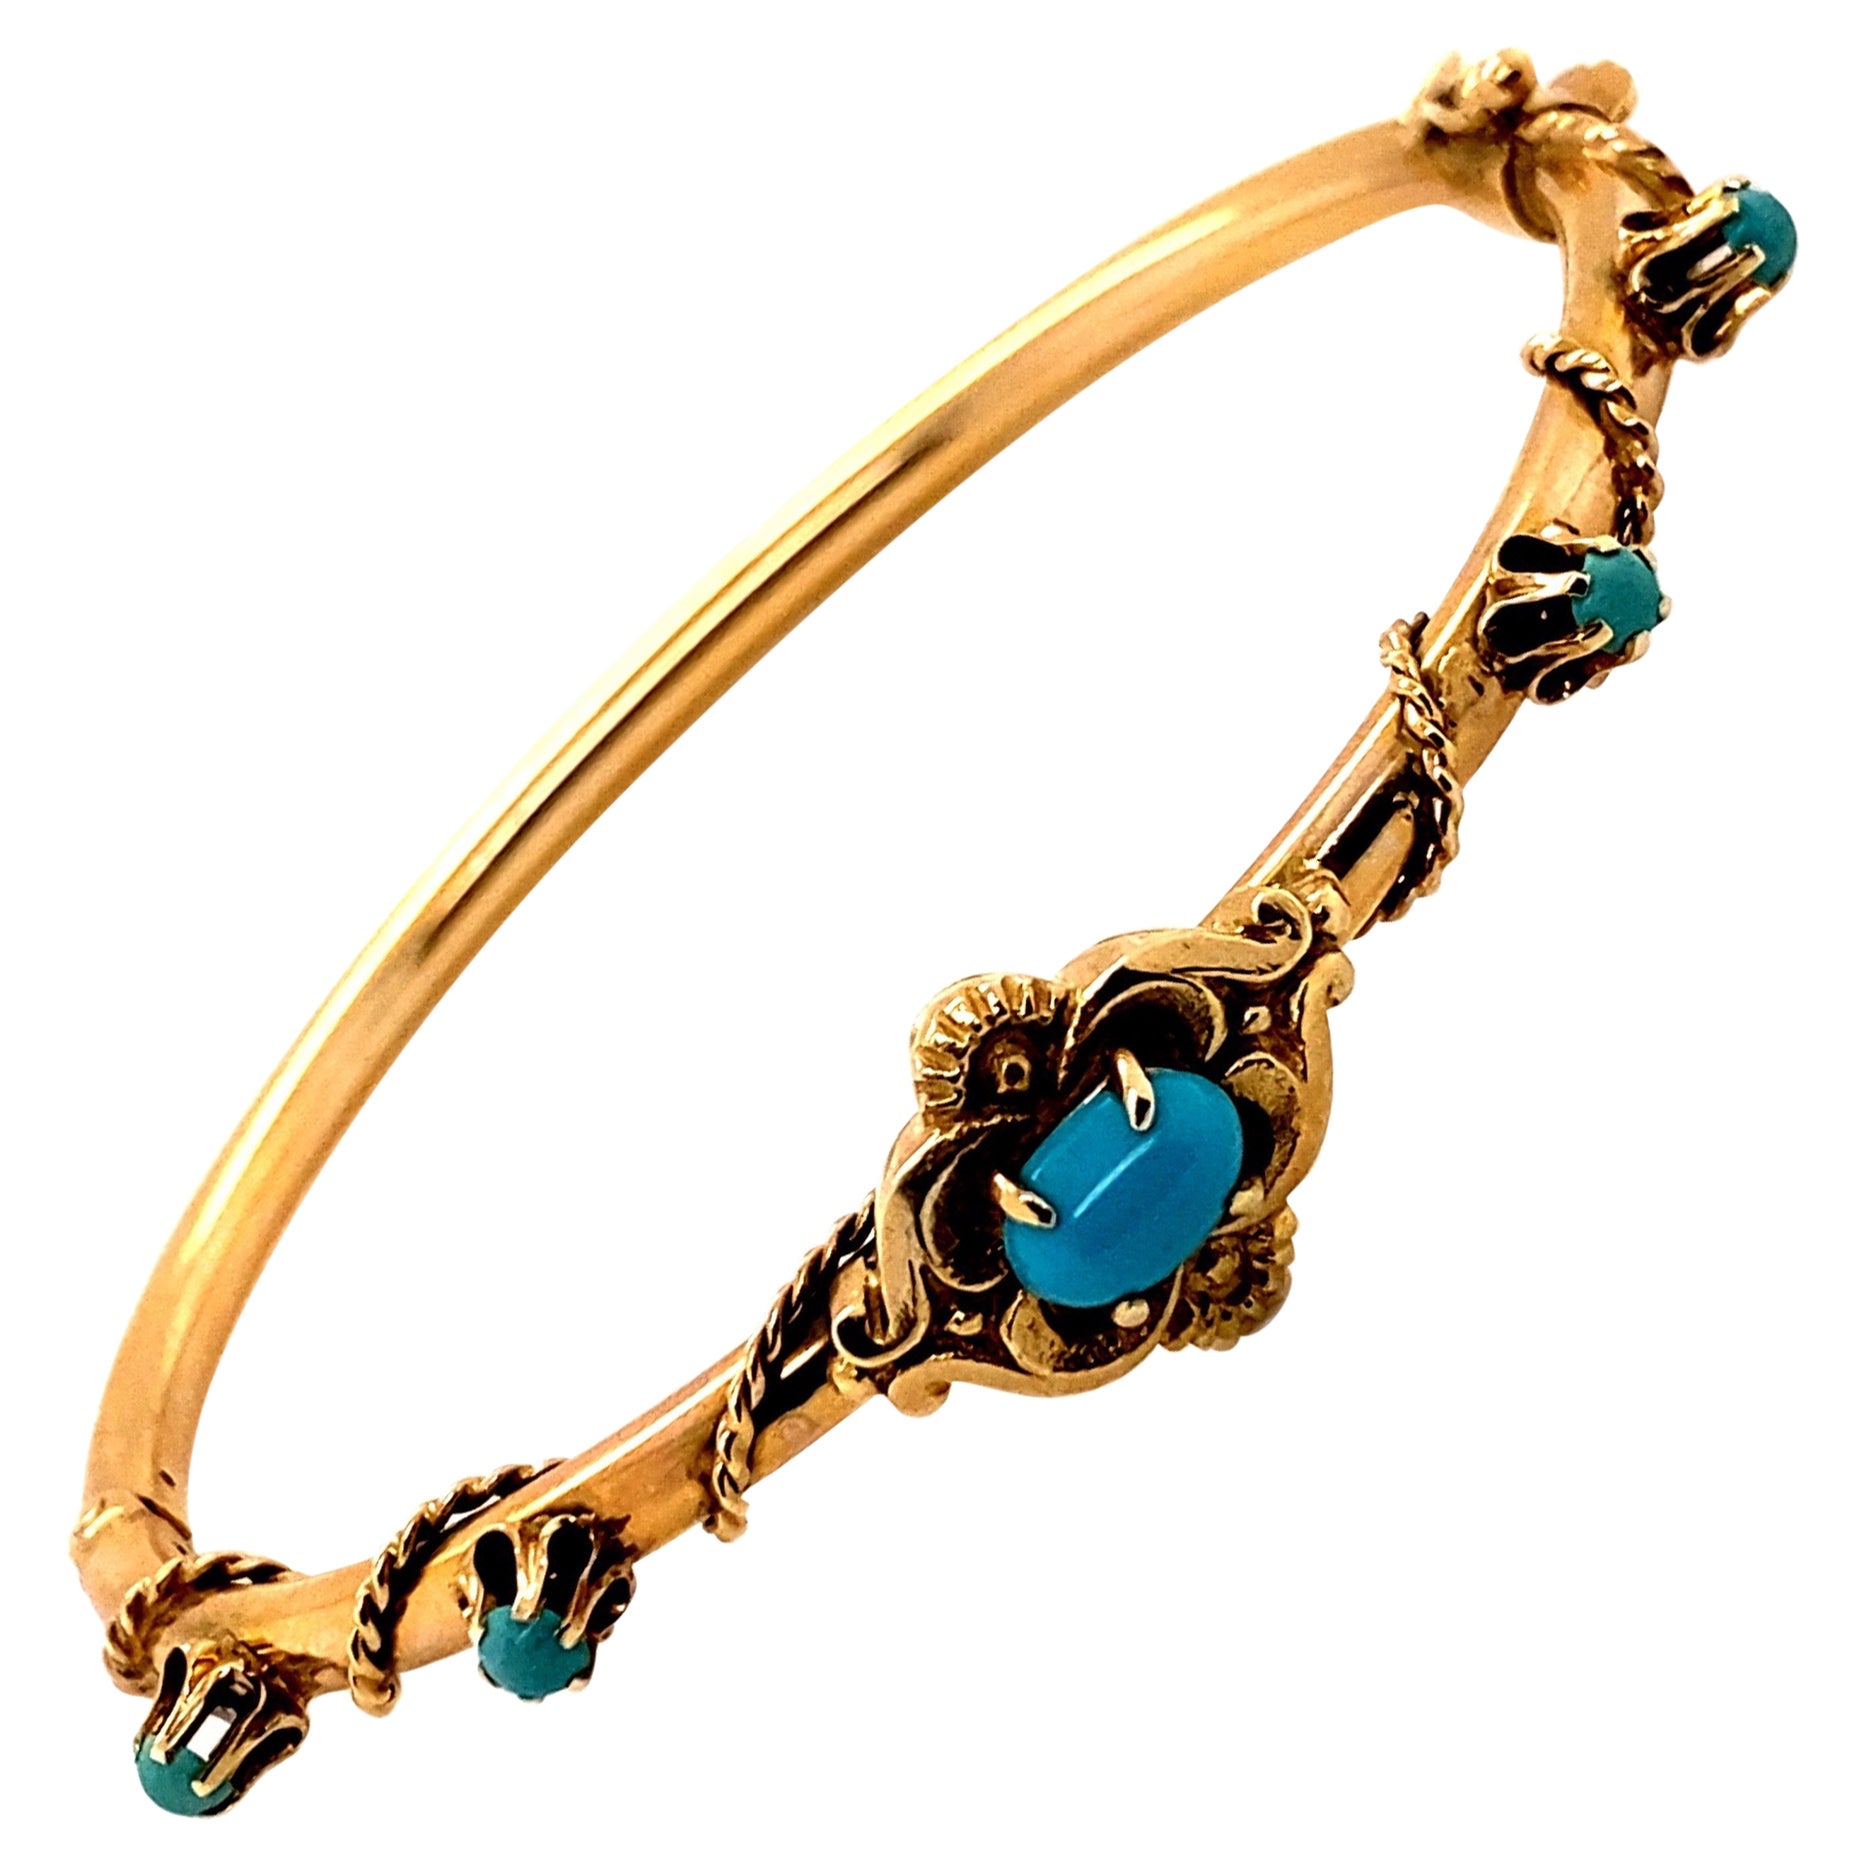 14K Yellow Gold Victorian Reproduction Bangle Bracelet with Turquoise